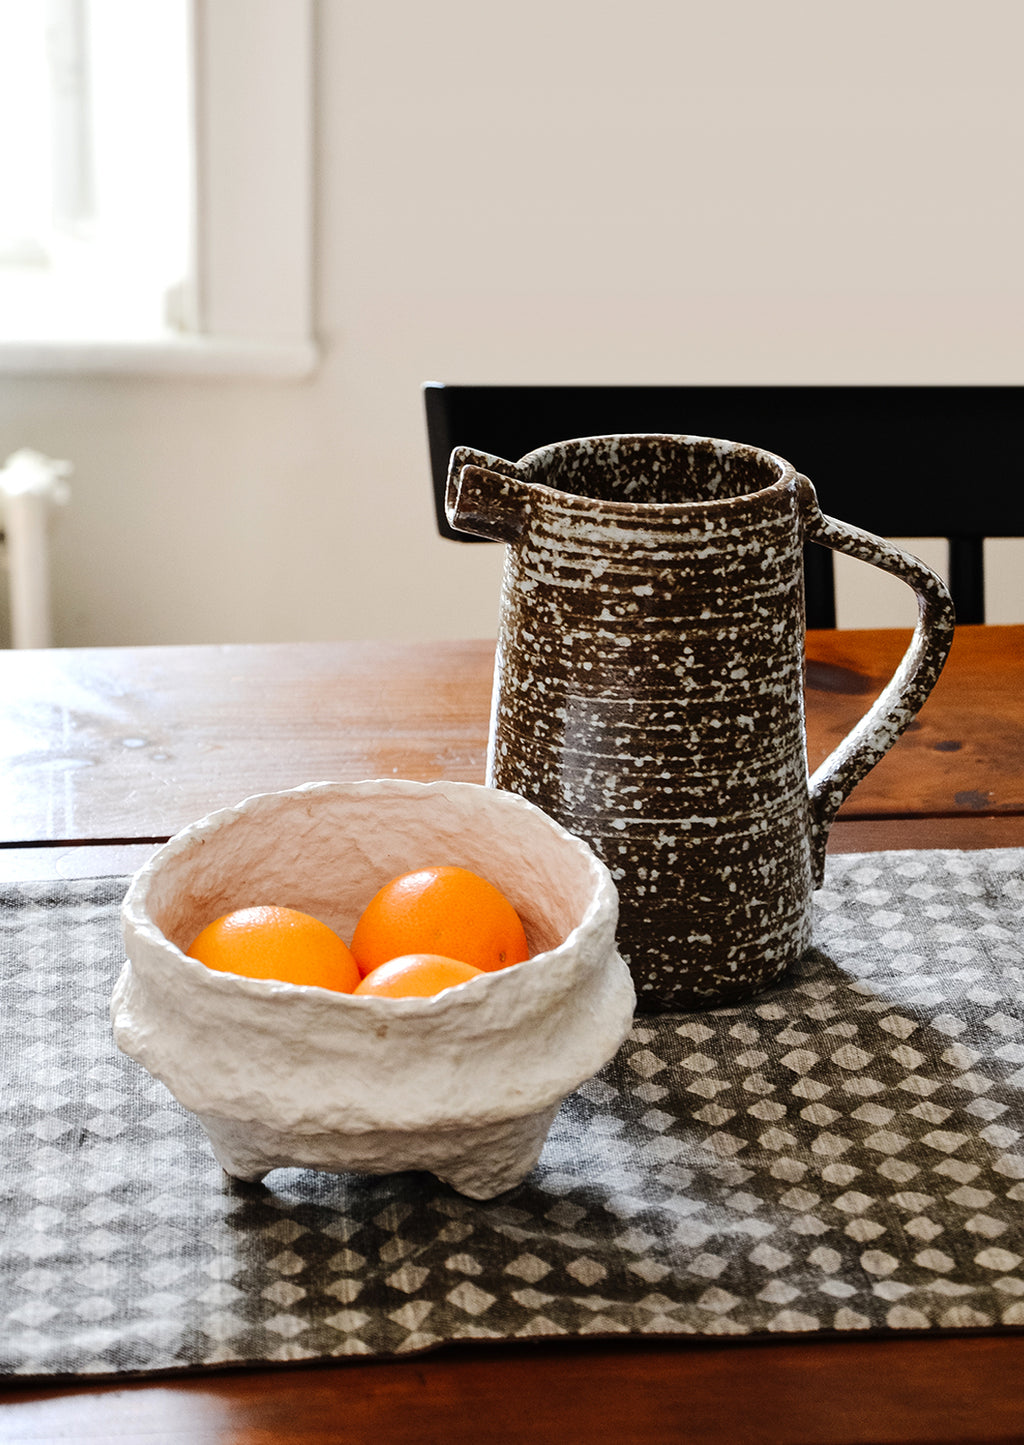 White: Tabletop scene with ceramic pitcher and white paper mache bowl with tangerines